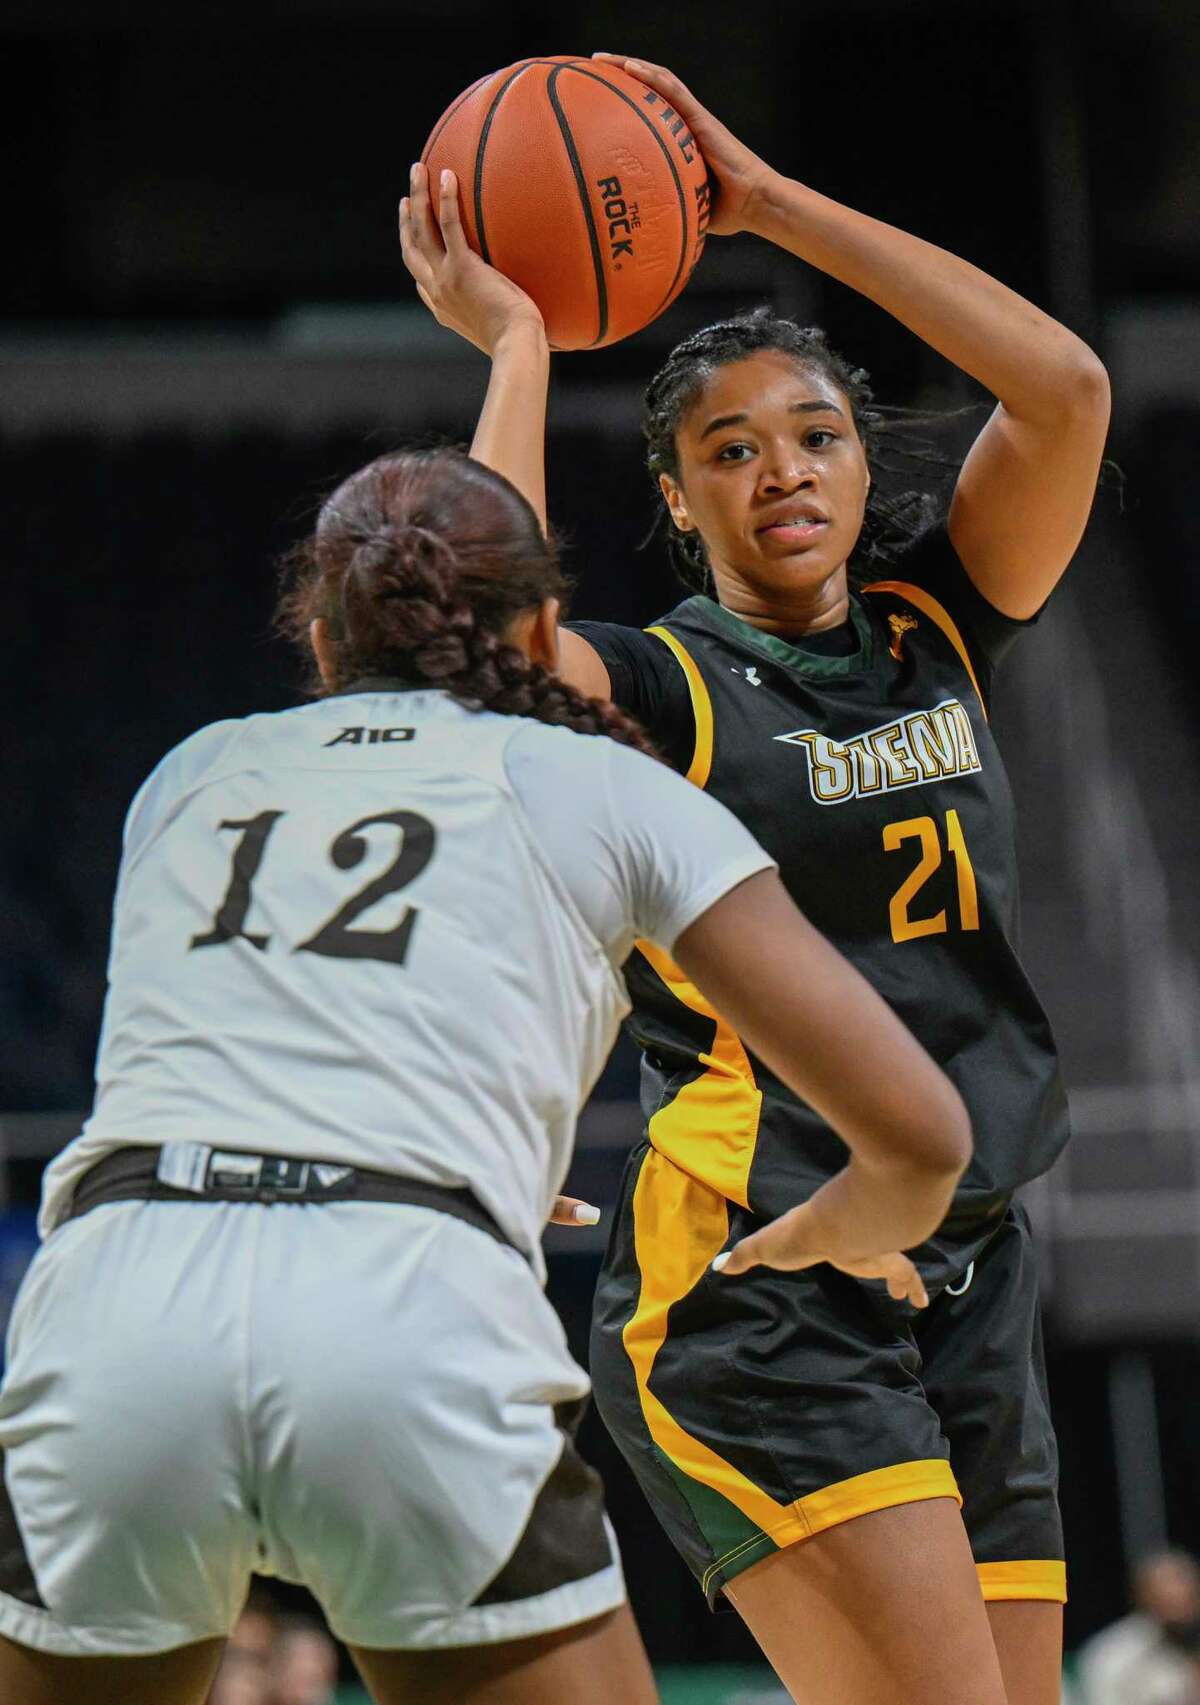 Siena's Anajah Brown, shown earlier this season against St. Bonaventure, had 17 points and 10 rebounds on Monday in a win over Binghamton.